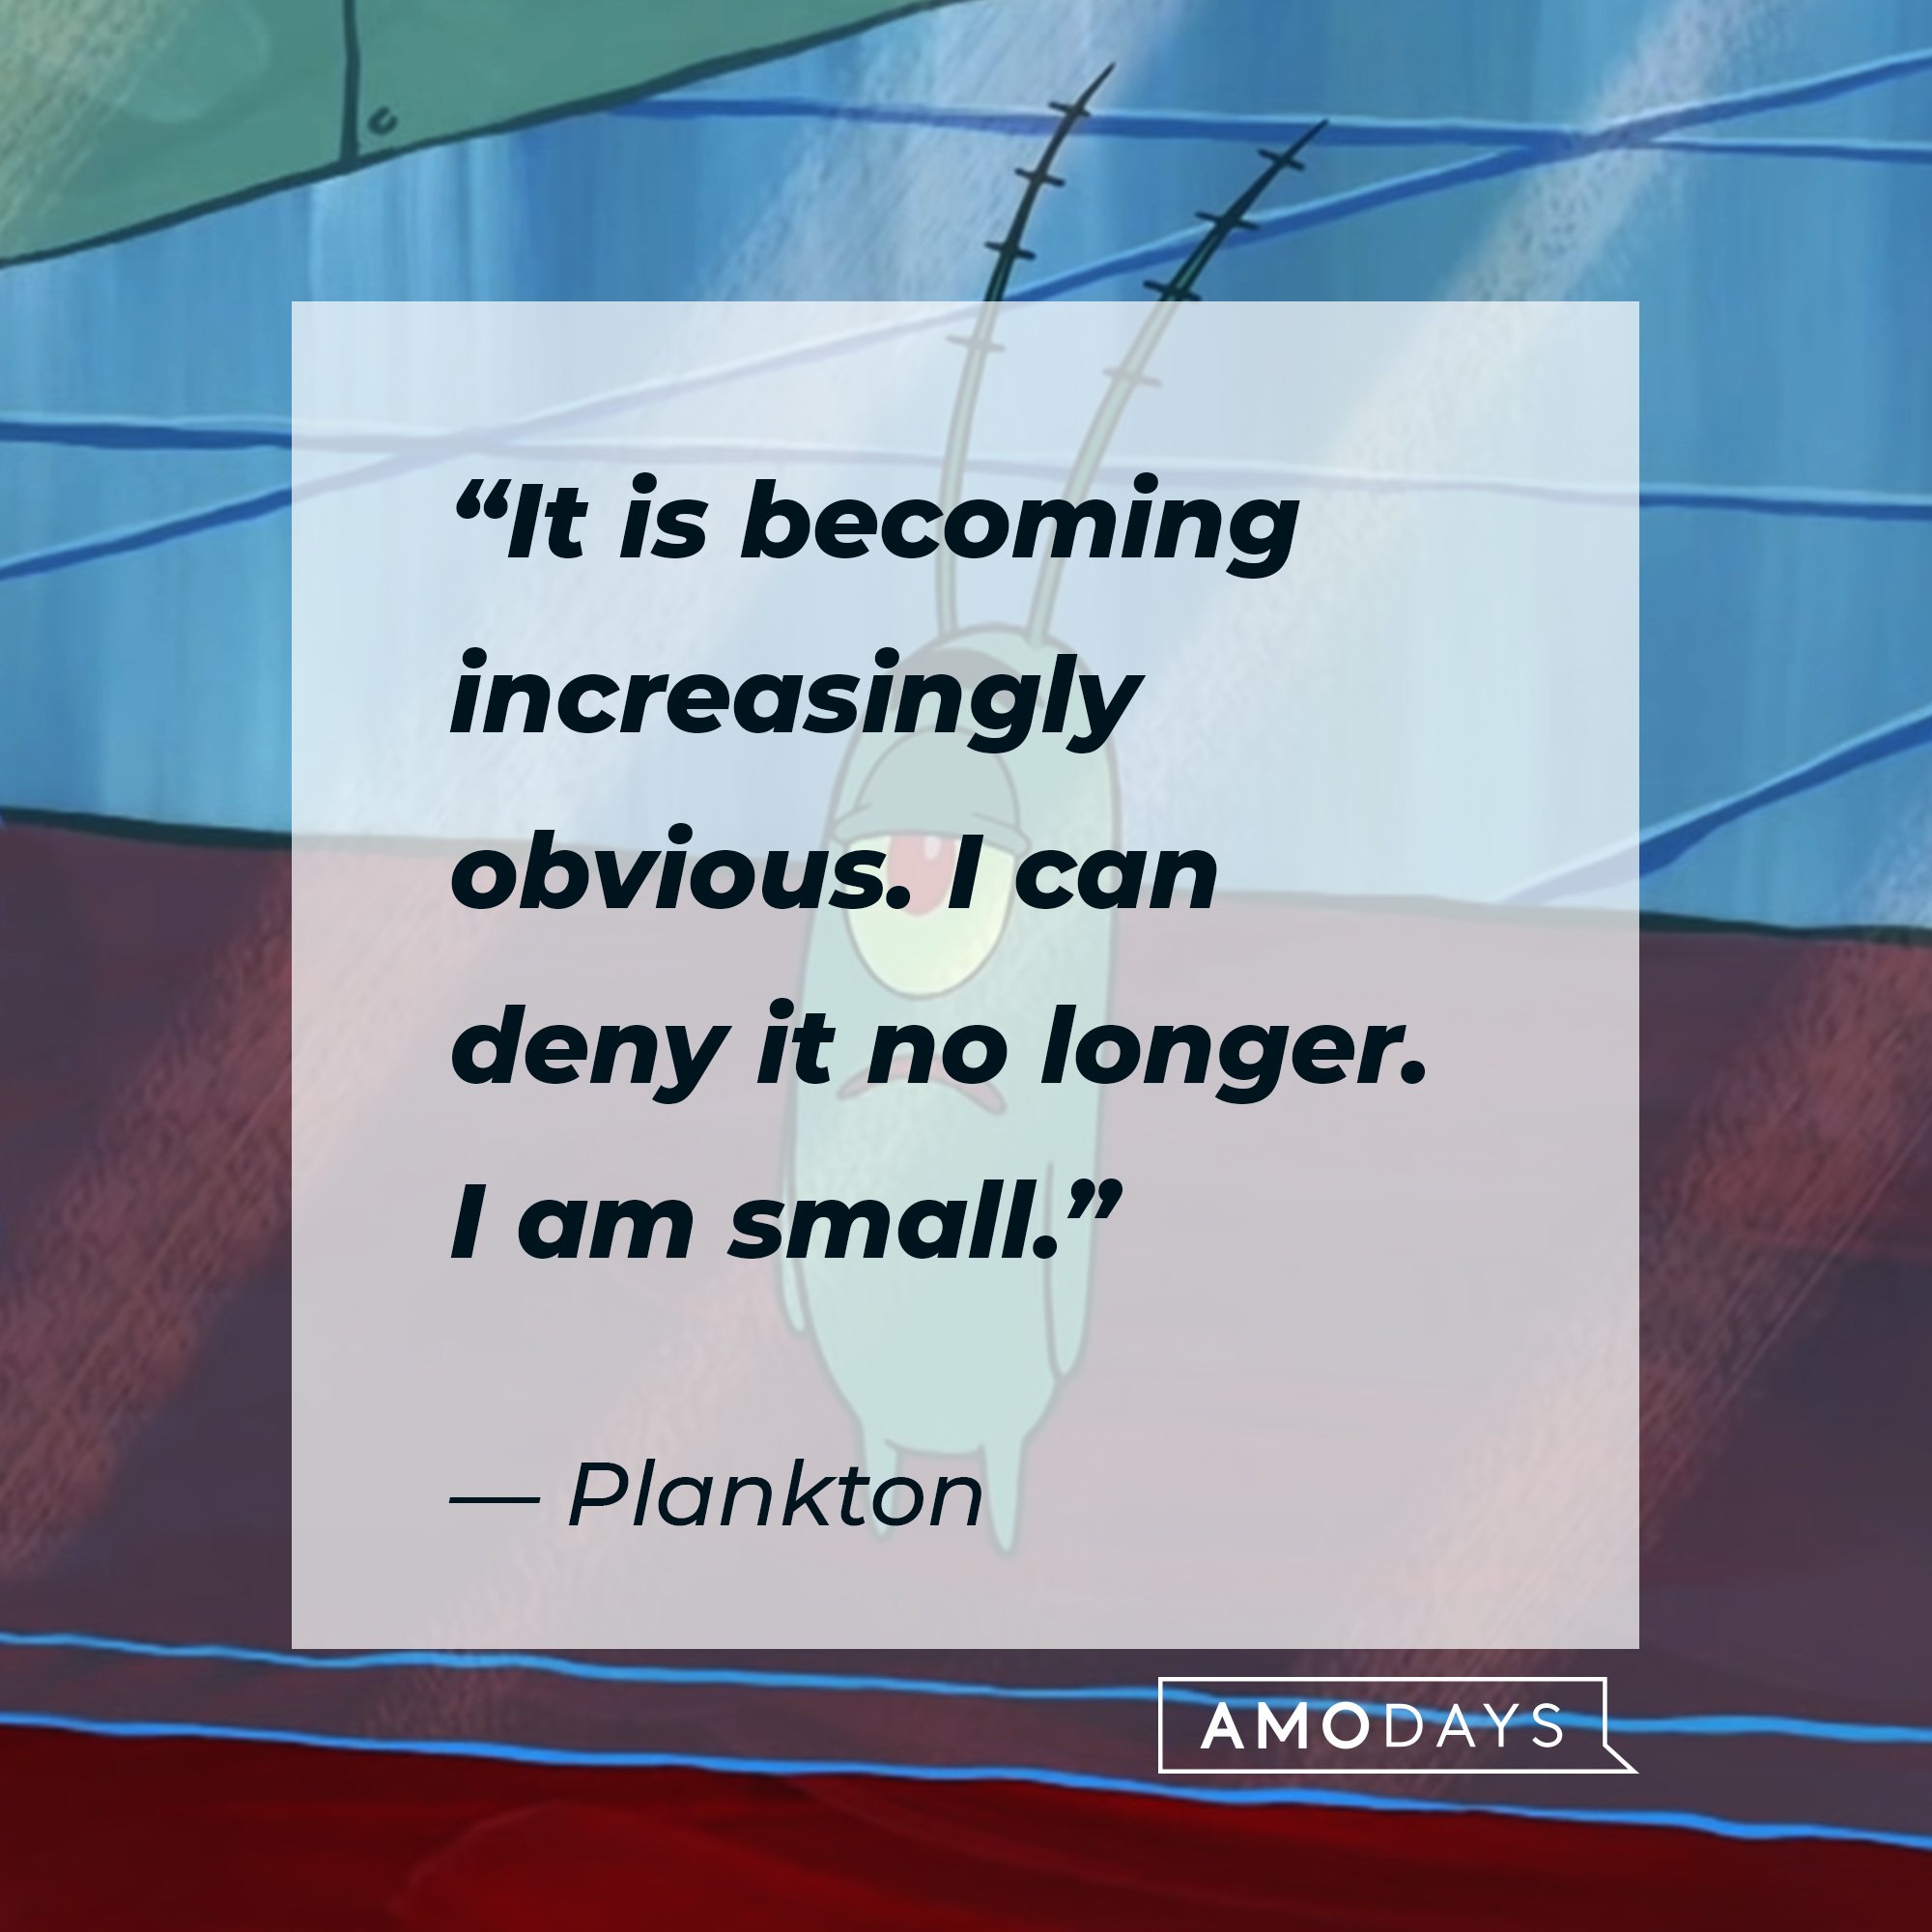 Plankton's quote: “It is becoming increasingly obvious. I can deny it no longer. I am small.” | Image: AmoDays